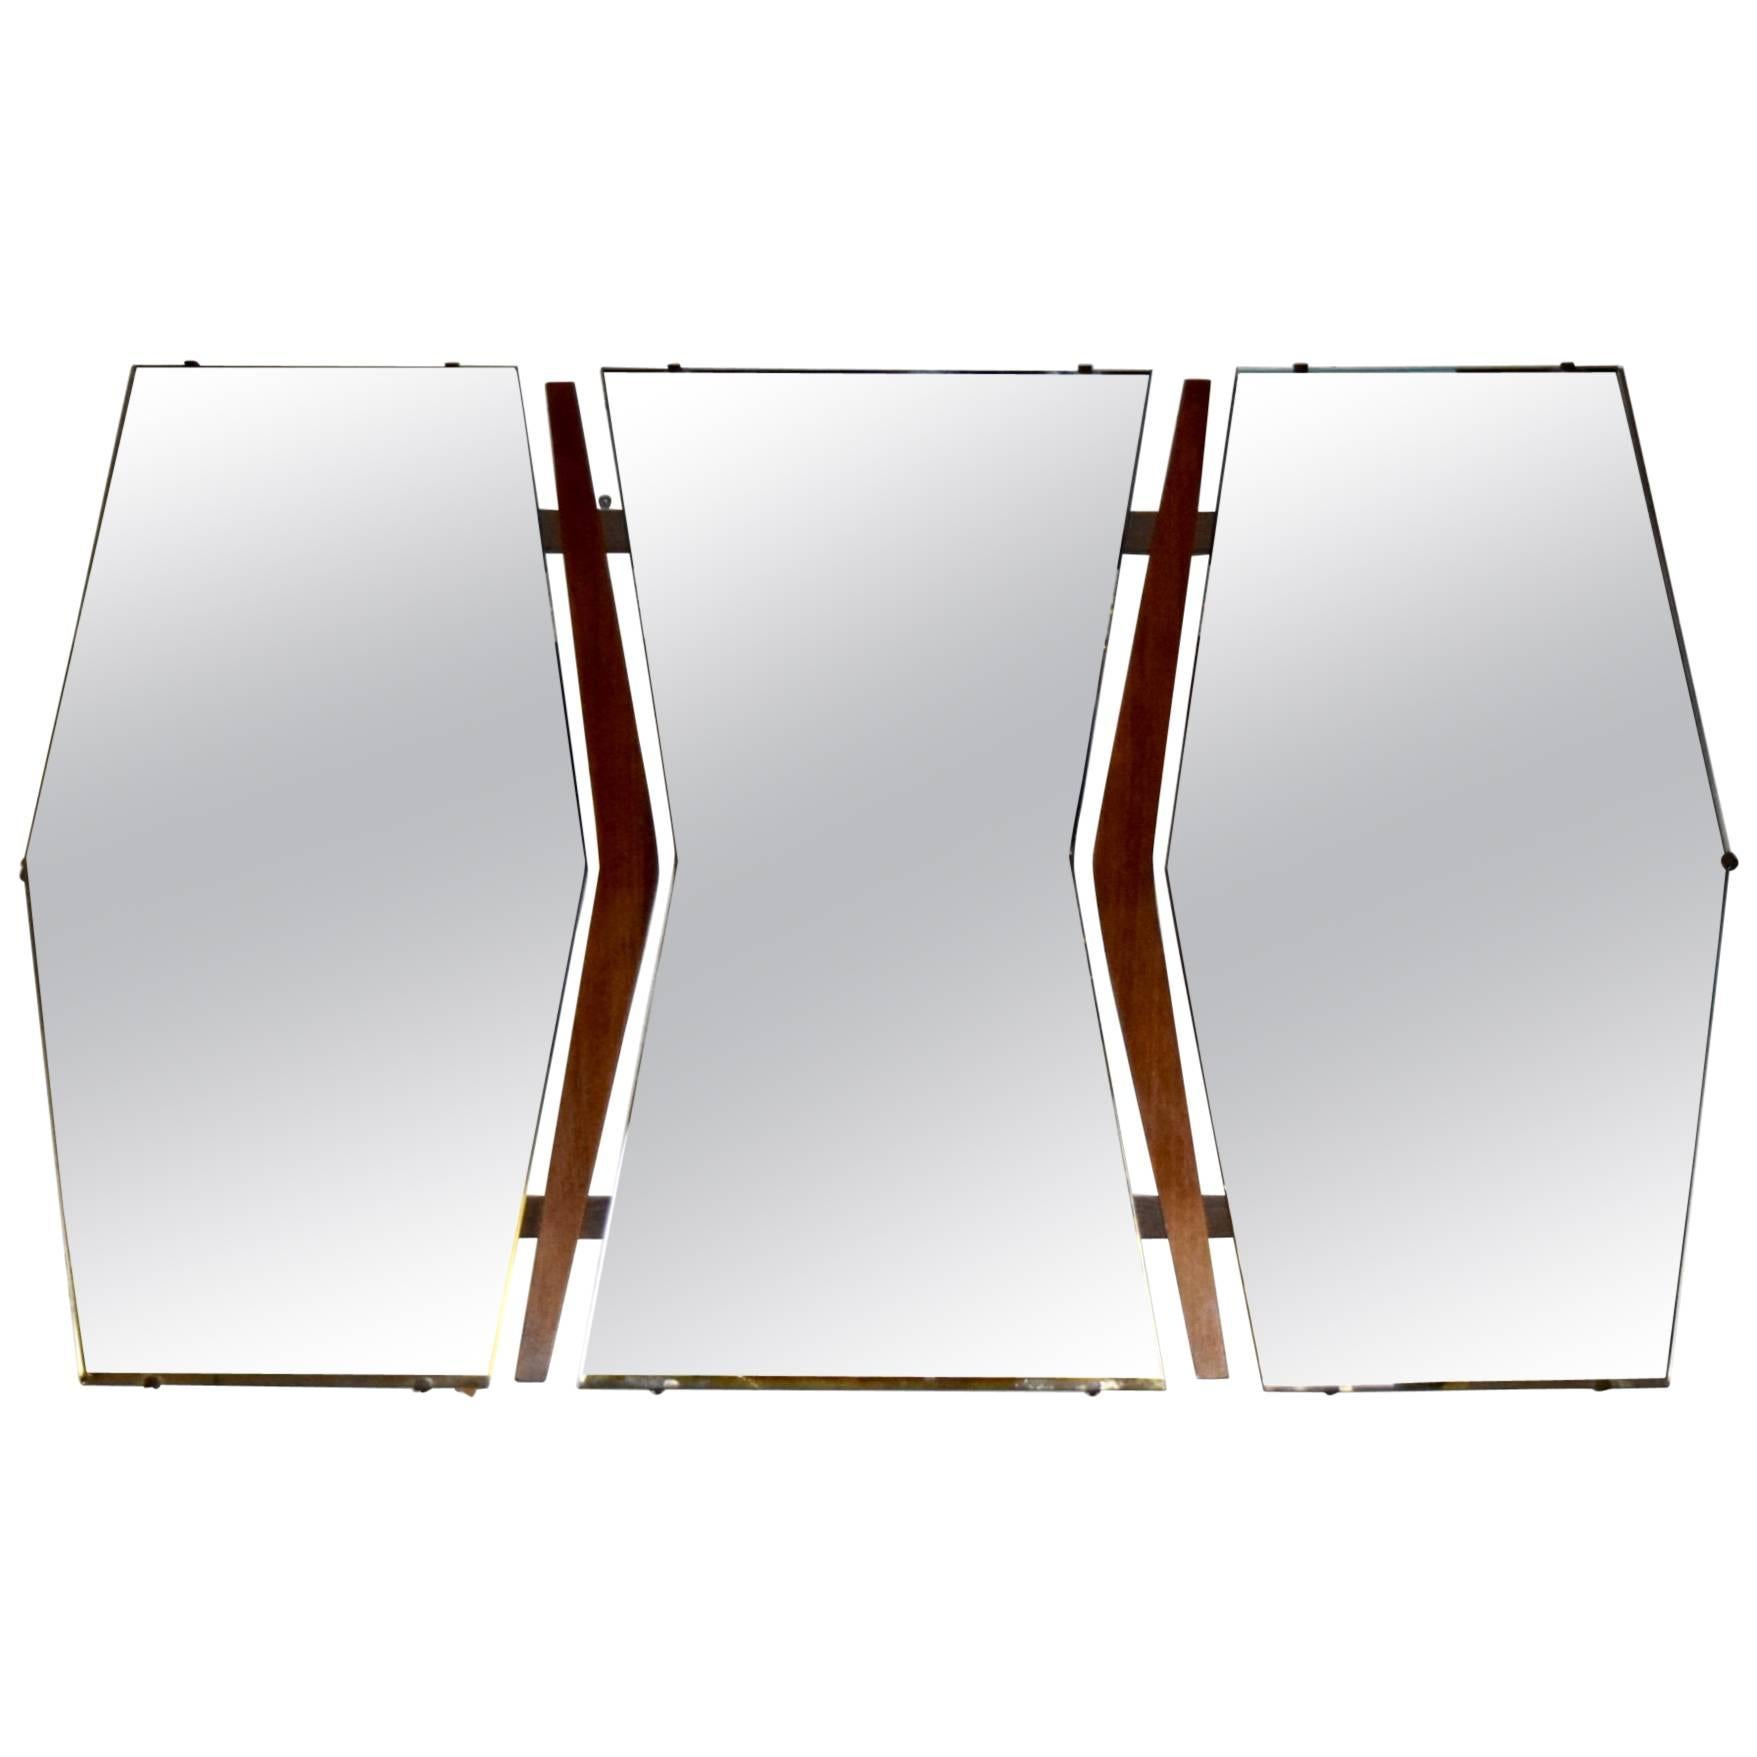 Wall mirror comprises three floating mirrors each cut on an angle with a contour wood frame. Both outside mirrors have an inverted shape to the centre the frame that follow the angles of each mirror's border.